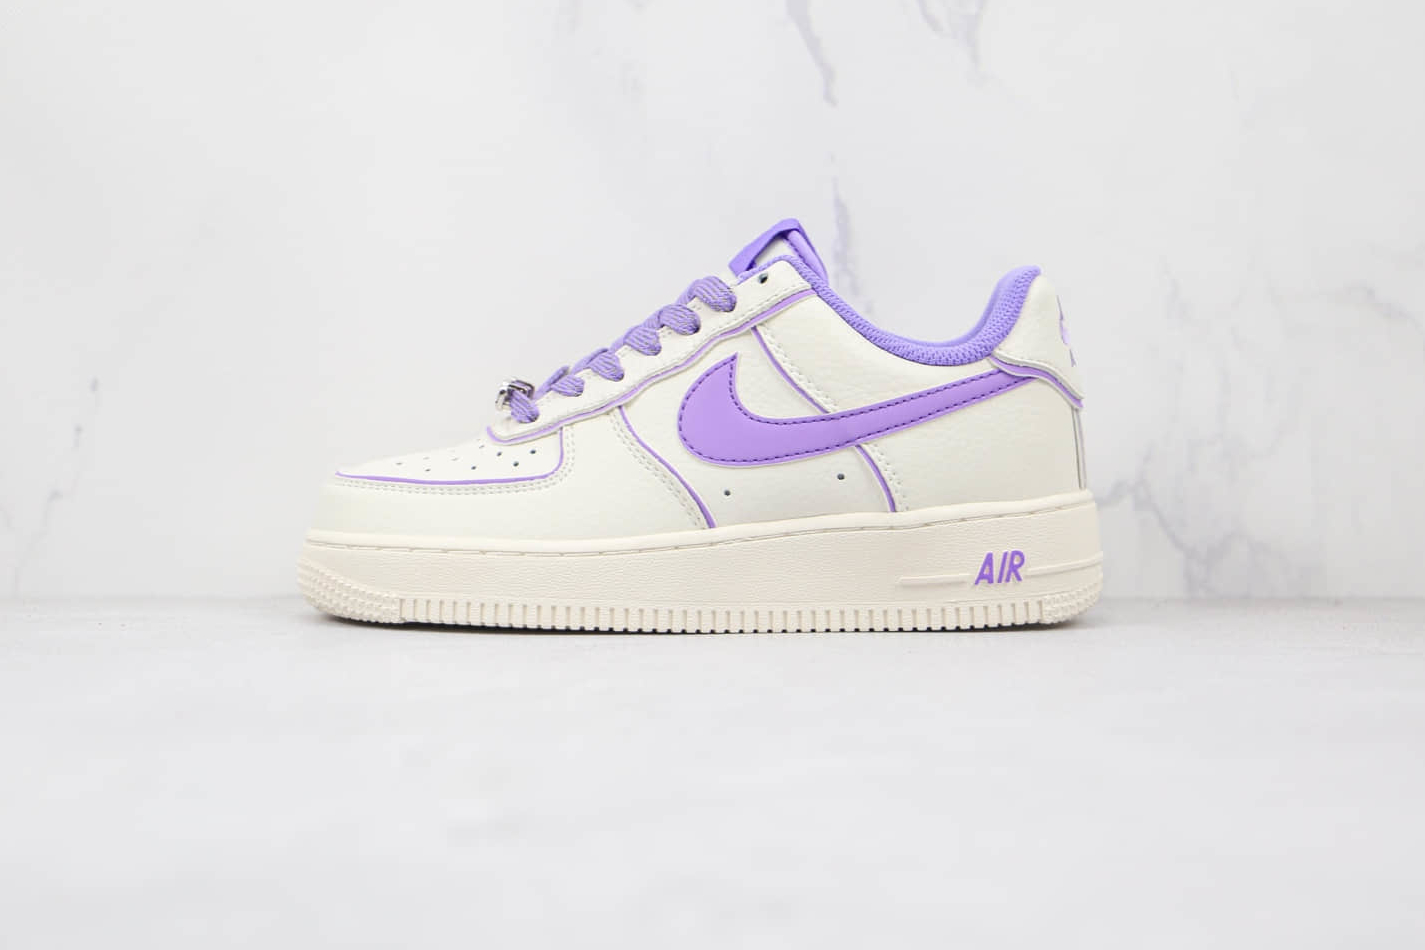 Nike Air Force 1 07 Low Su19 White Purple UH8958-055 - Stylish and Trendy Sneakers for Men and Women